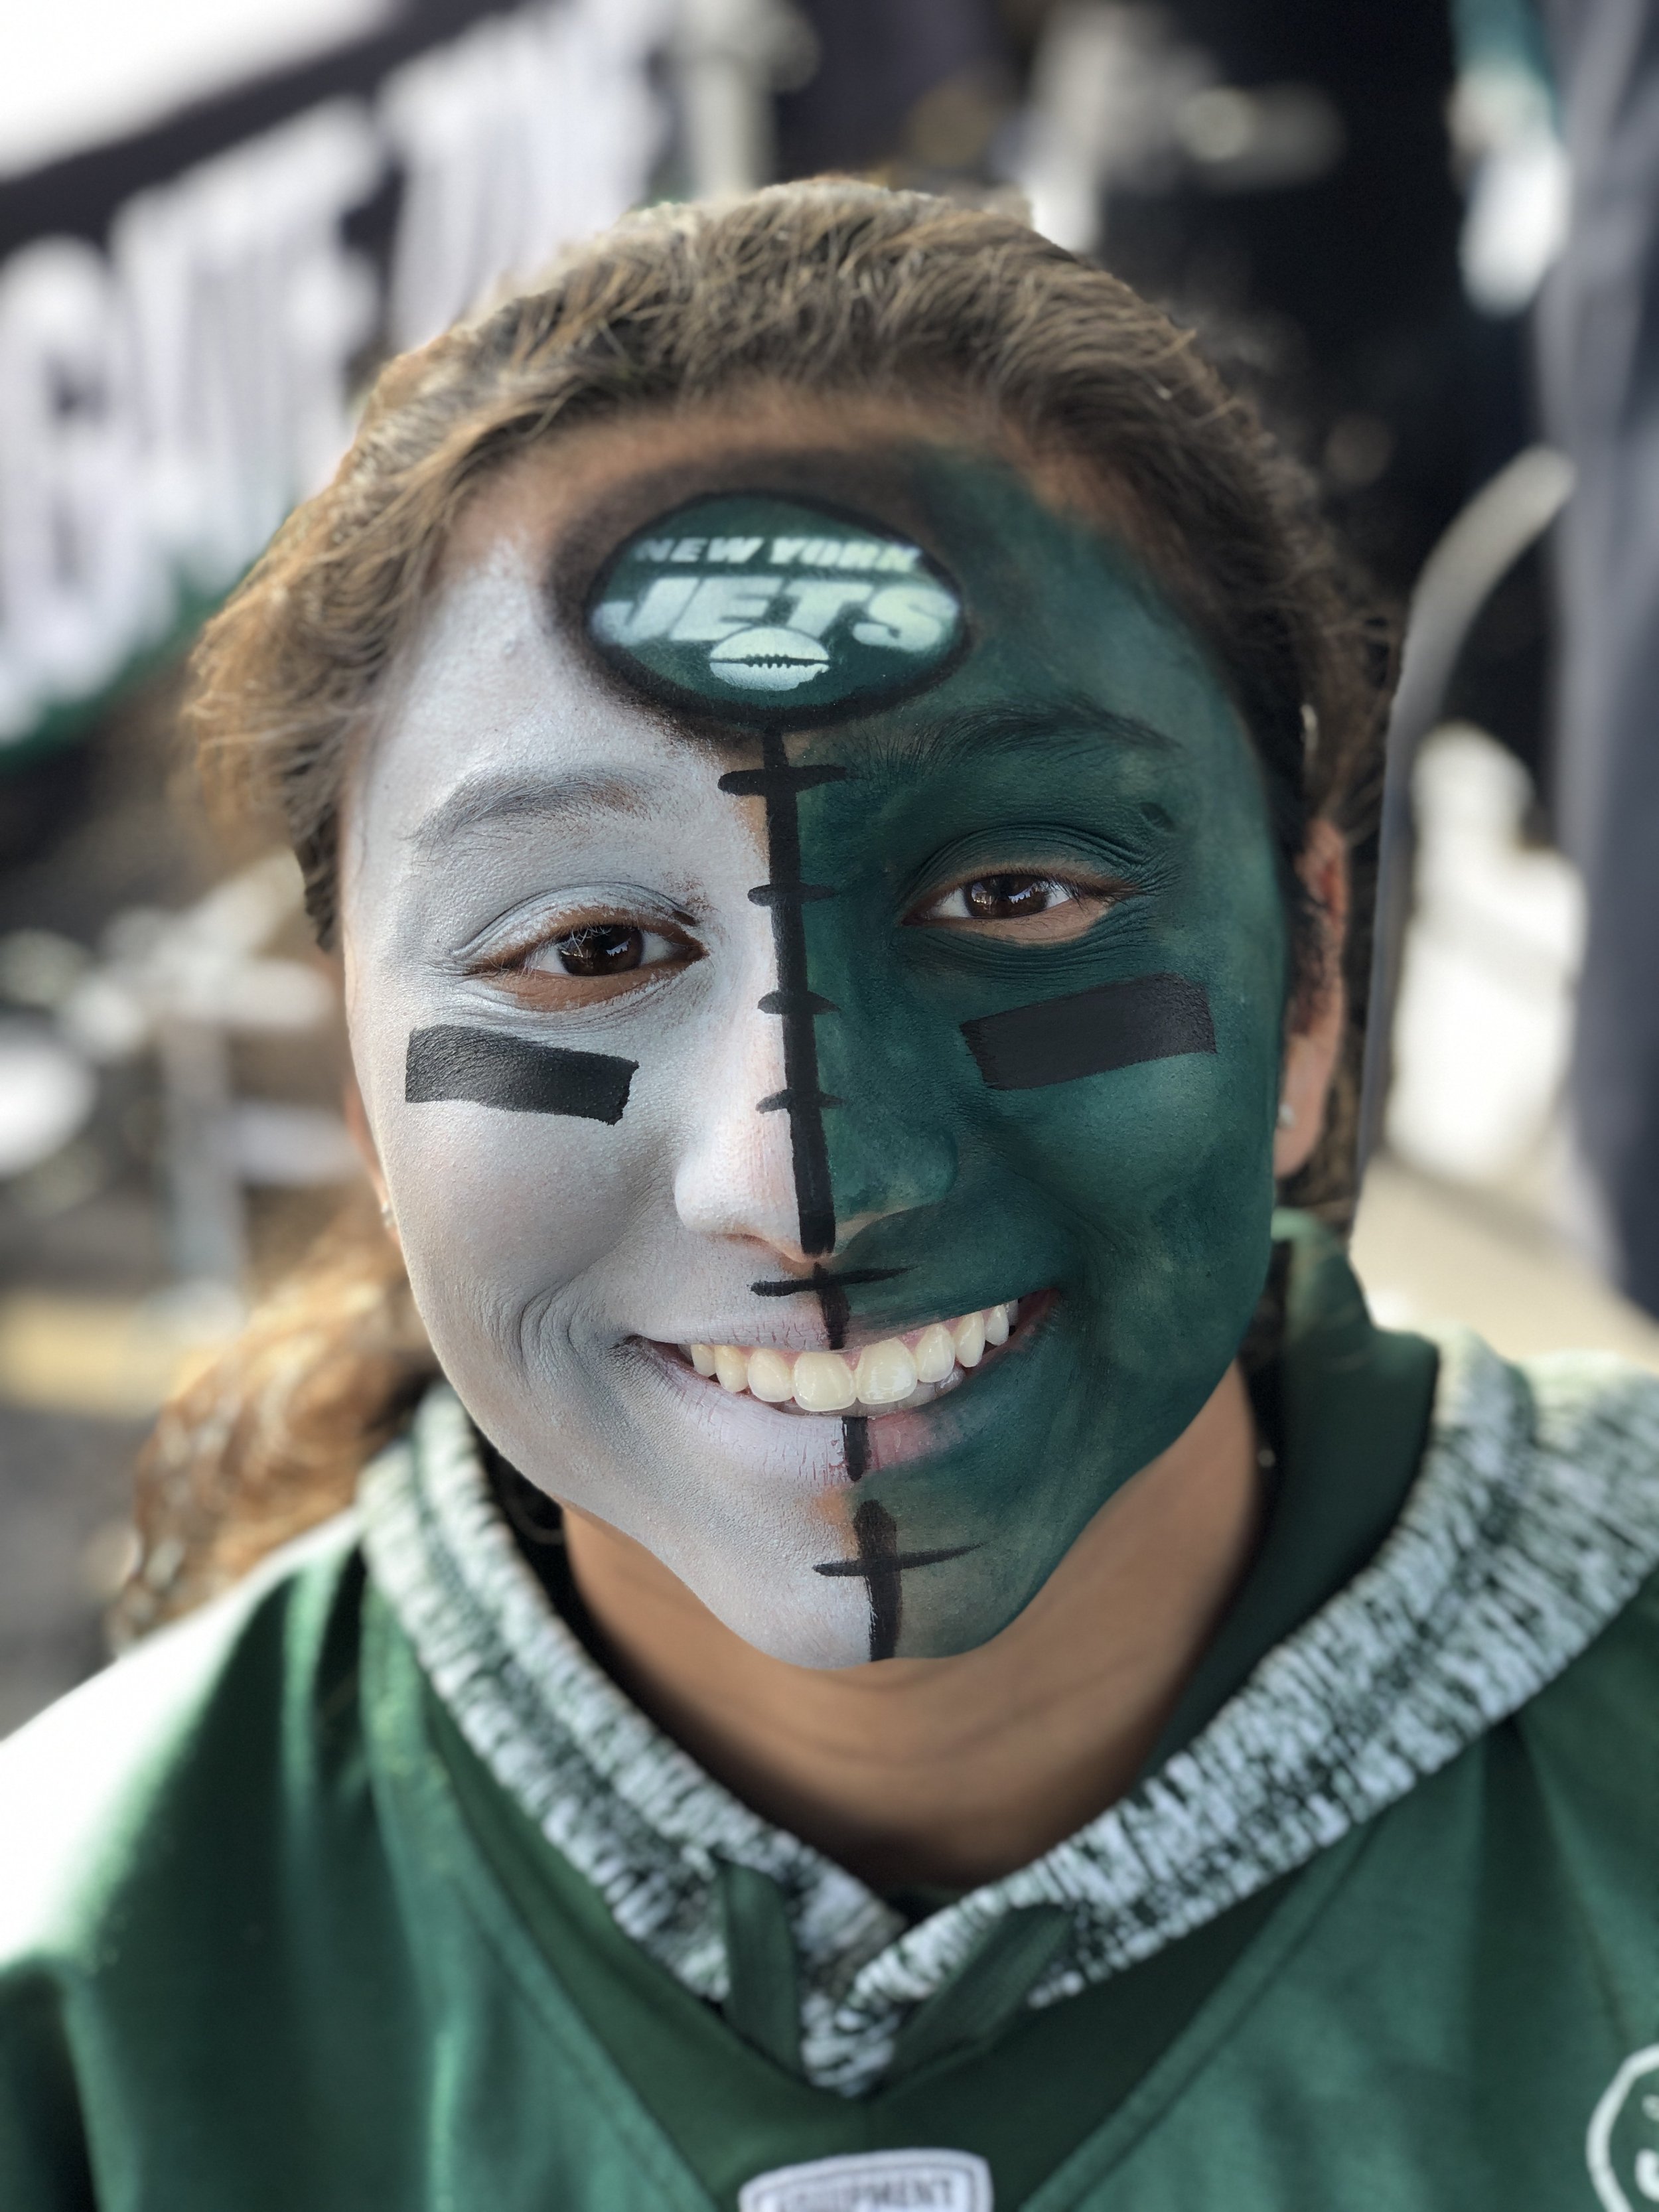 New York Jets Face Painting for Football Game.jpg